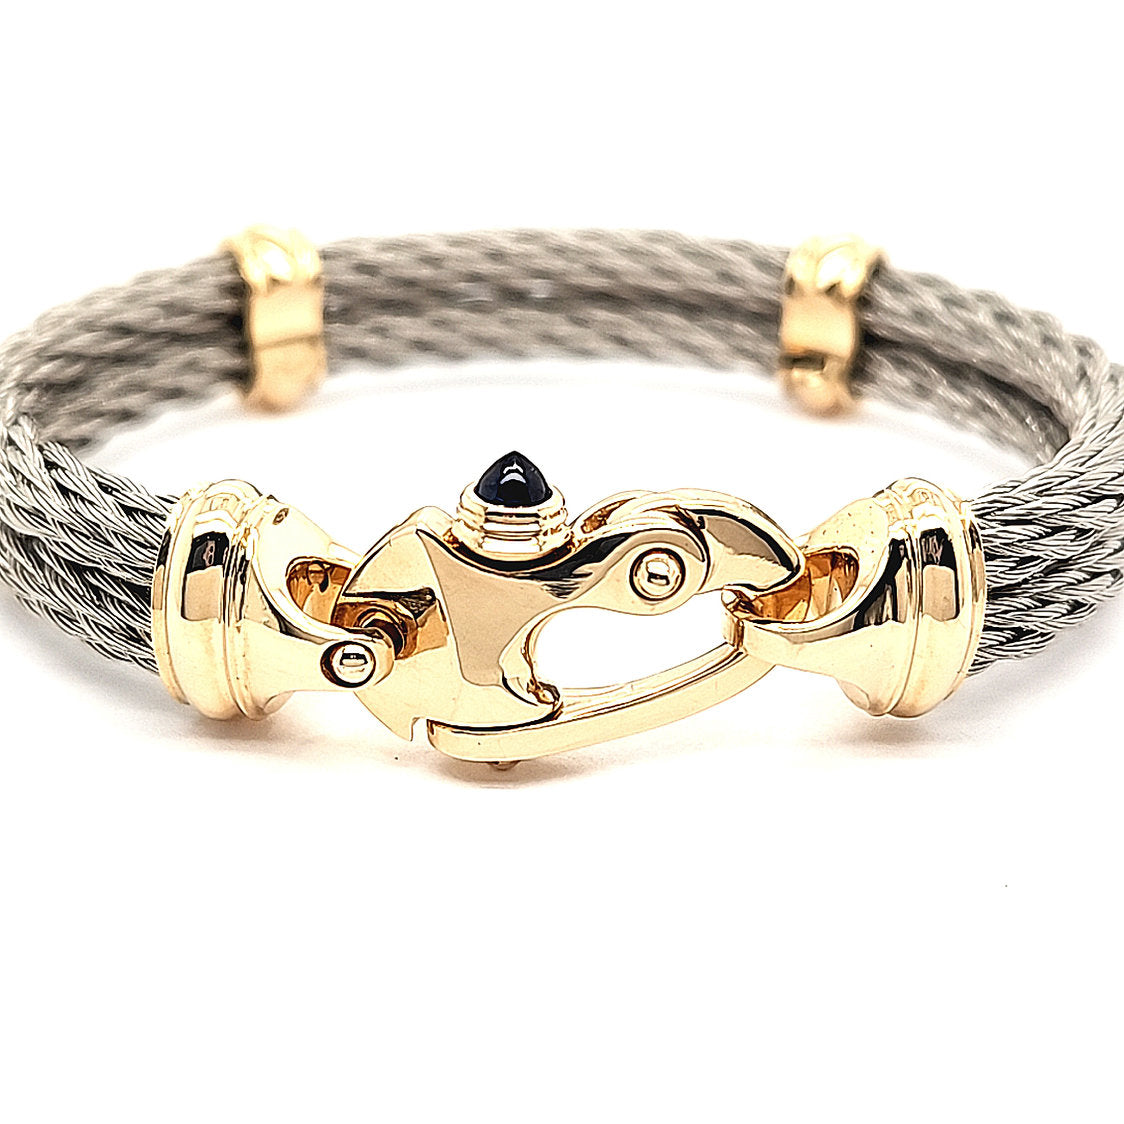 Nouveau Braid® 4.5mm Double Cable Bracelet with 14K Gold Mariner's Clasp® and Caps